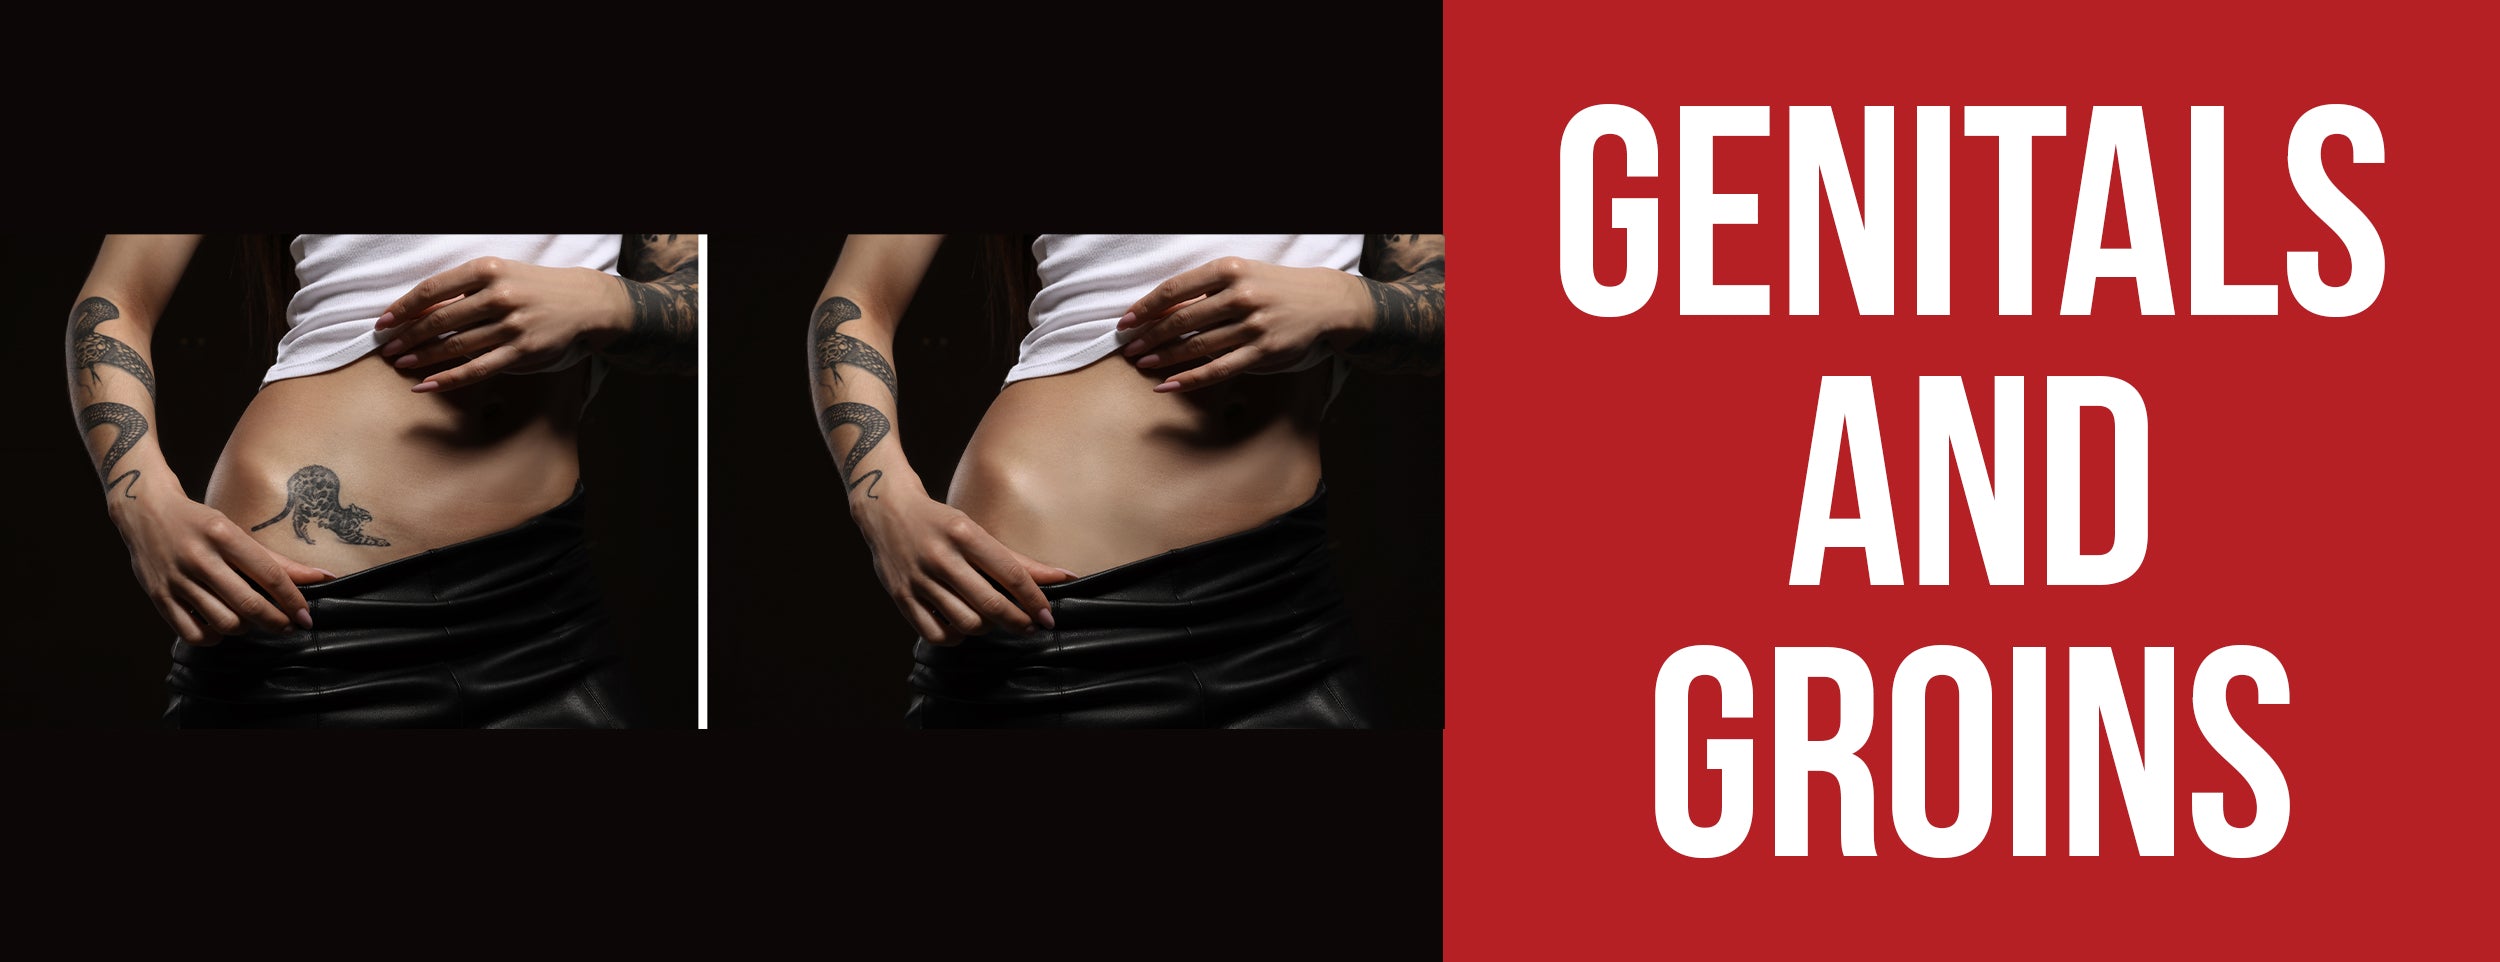 The most painful tattoos on the genitals and groins